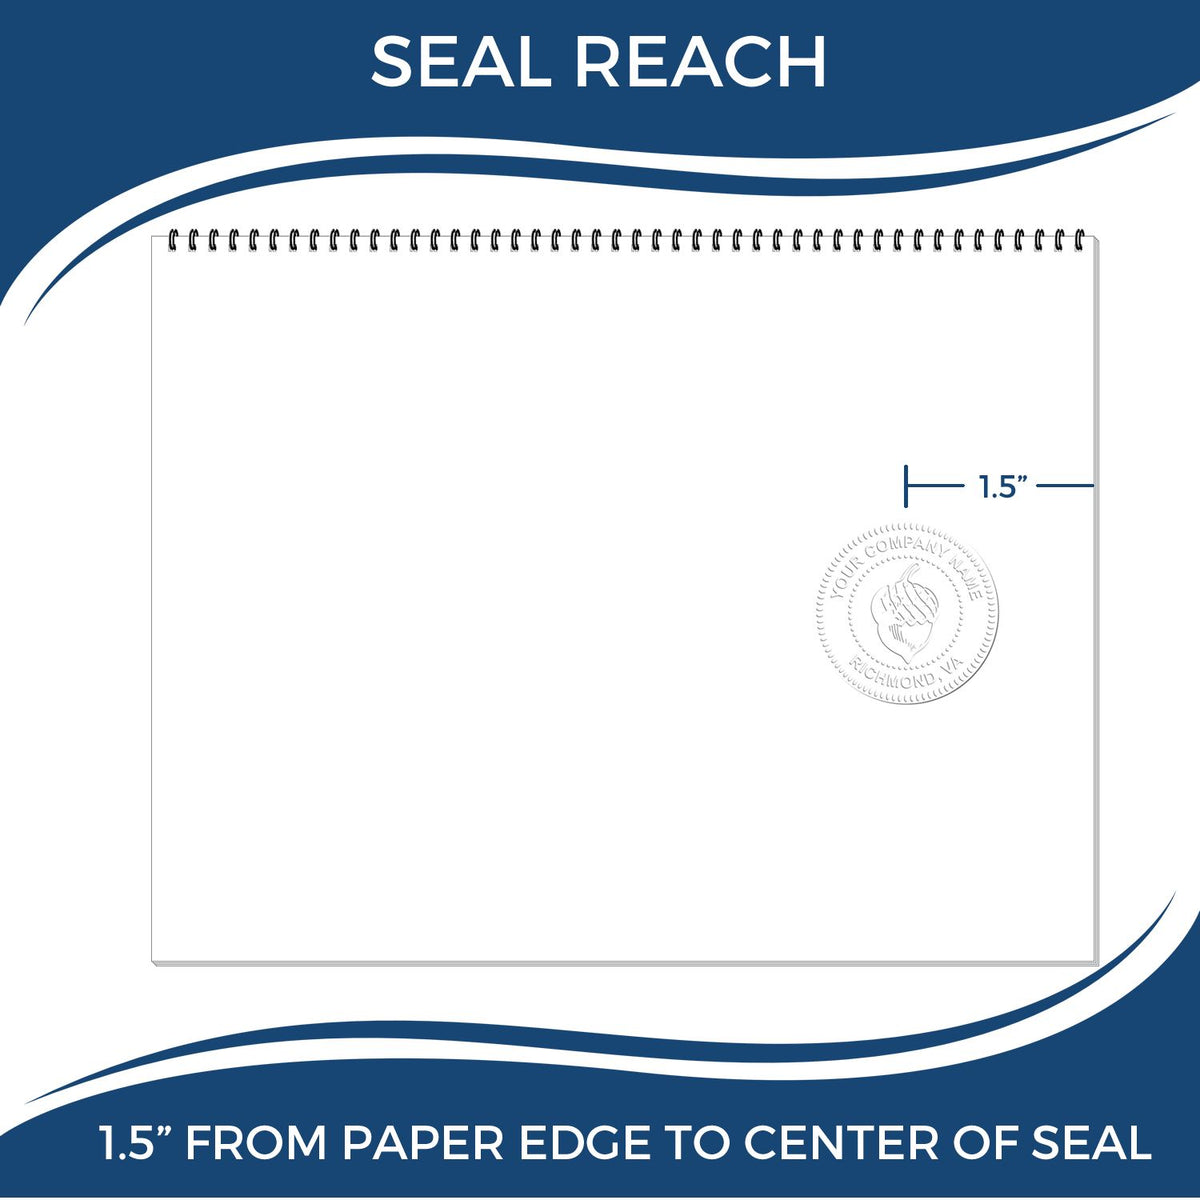 An infographic showing the seal reach which is represented by a ruler and a miniature seal image of the Alabama Desk Surveyor Seal Embosser